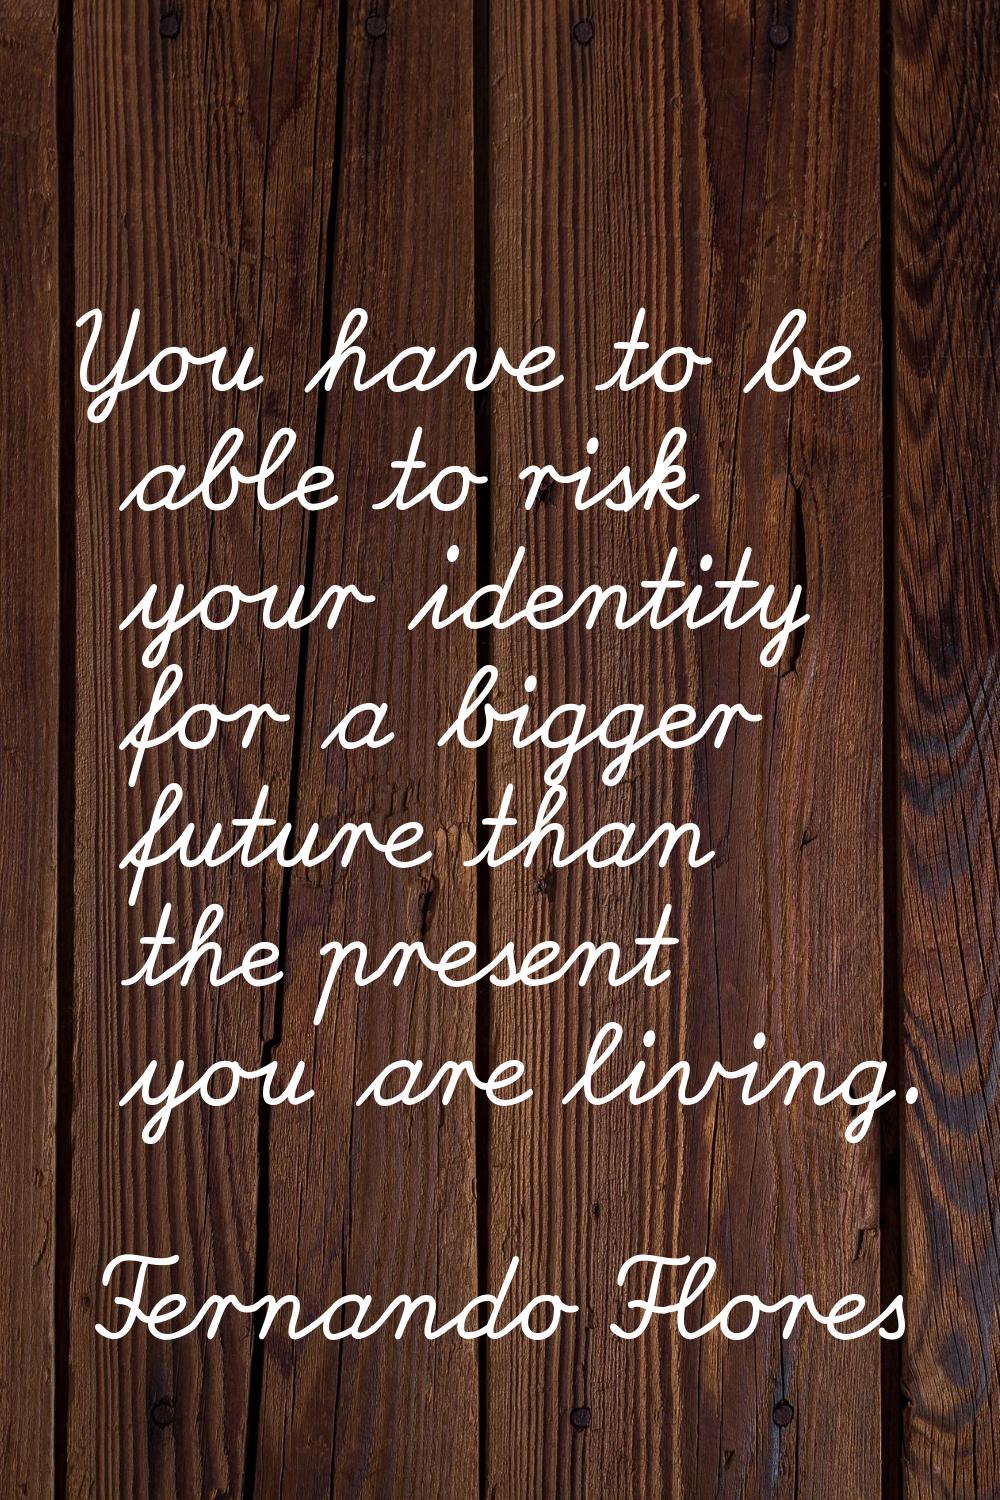 You have to be able to risk your identity for a bigger future than the present you are living.